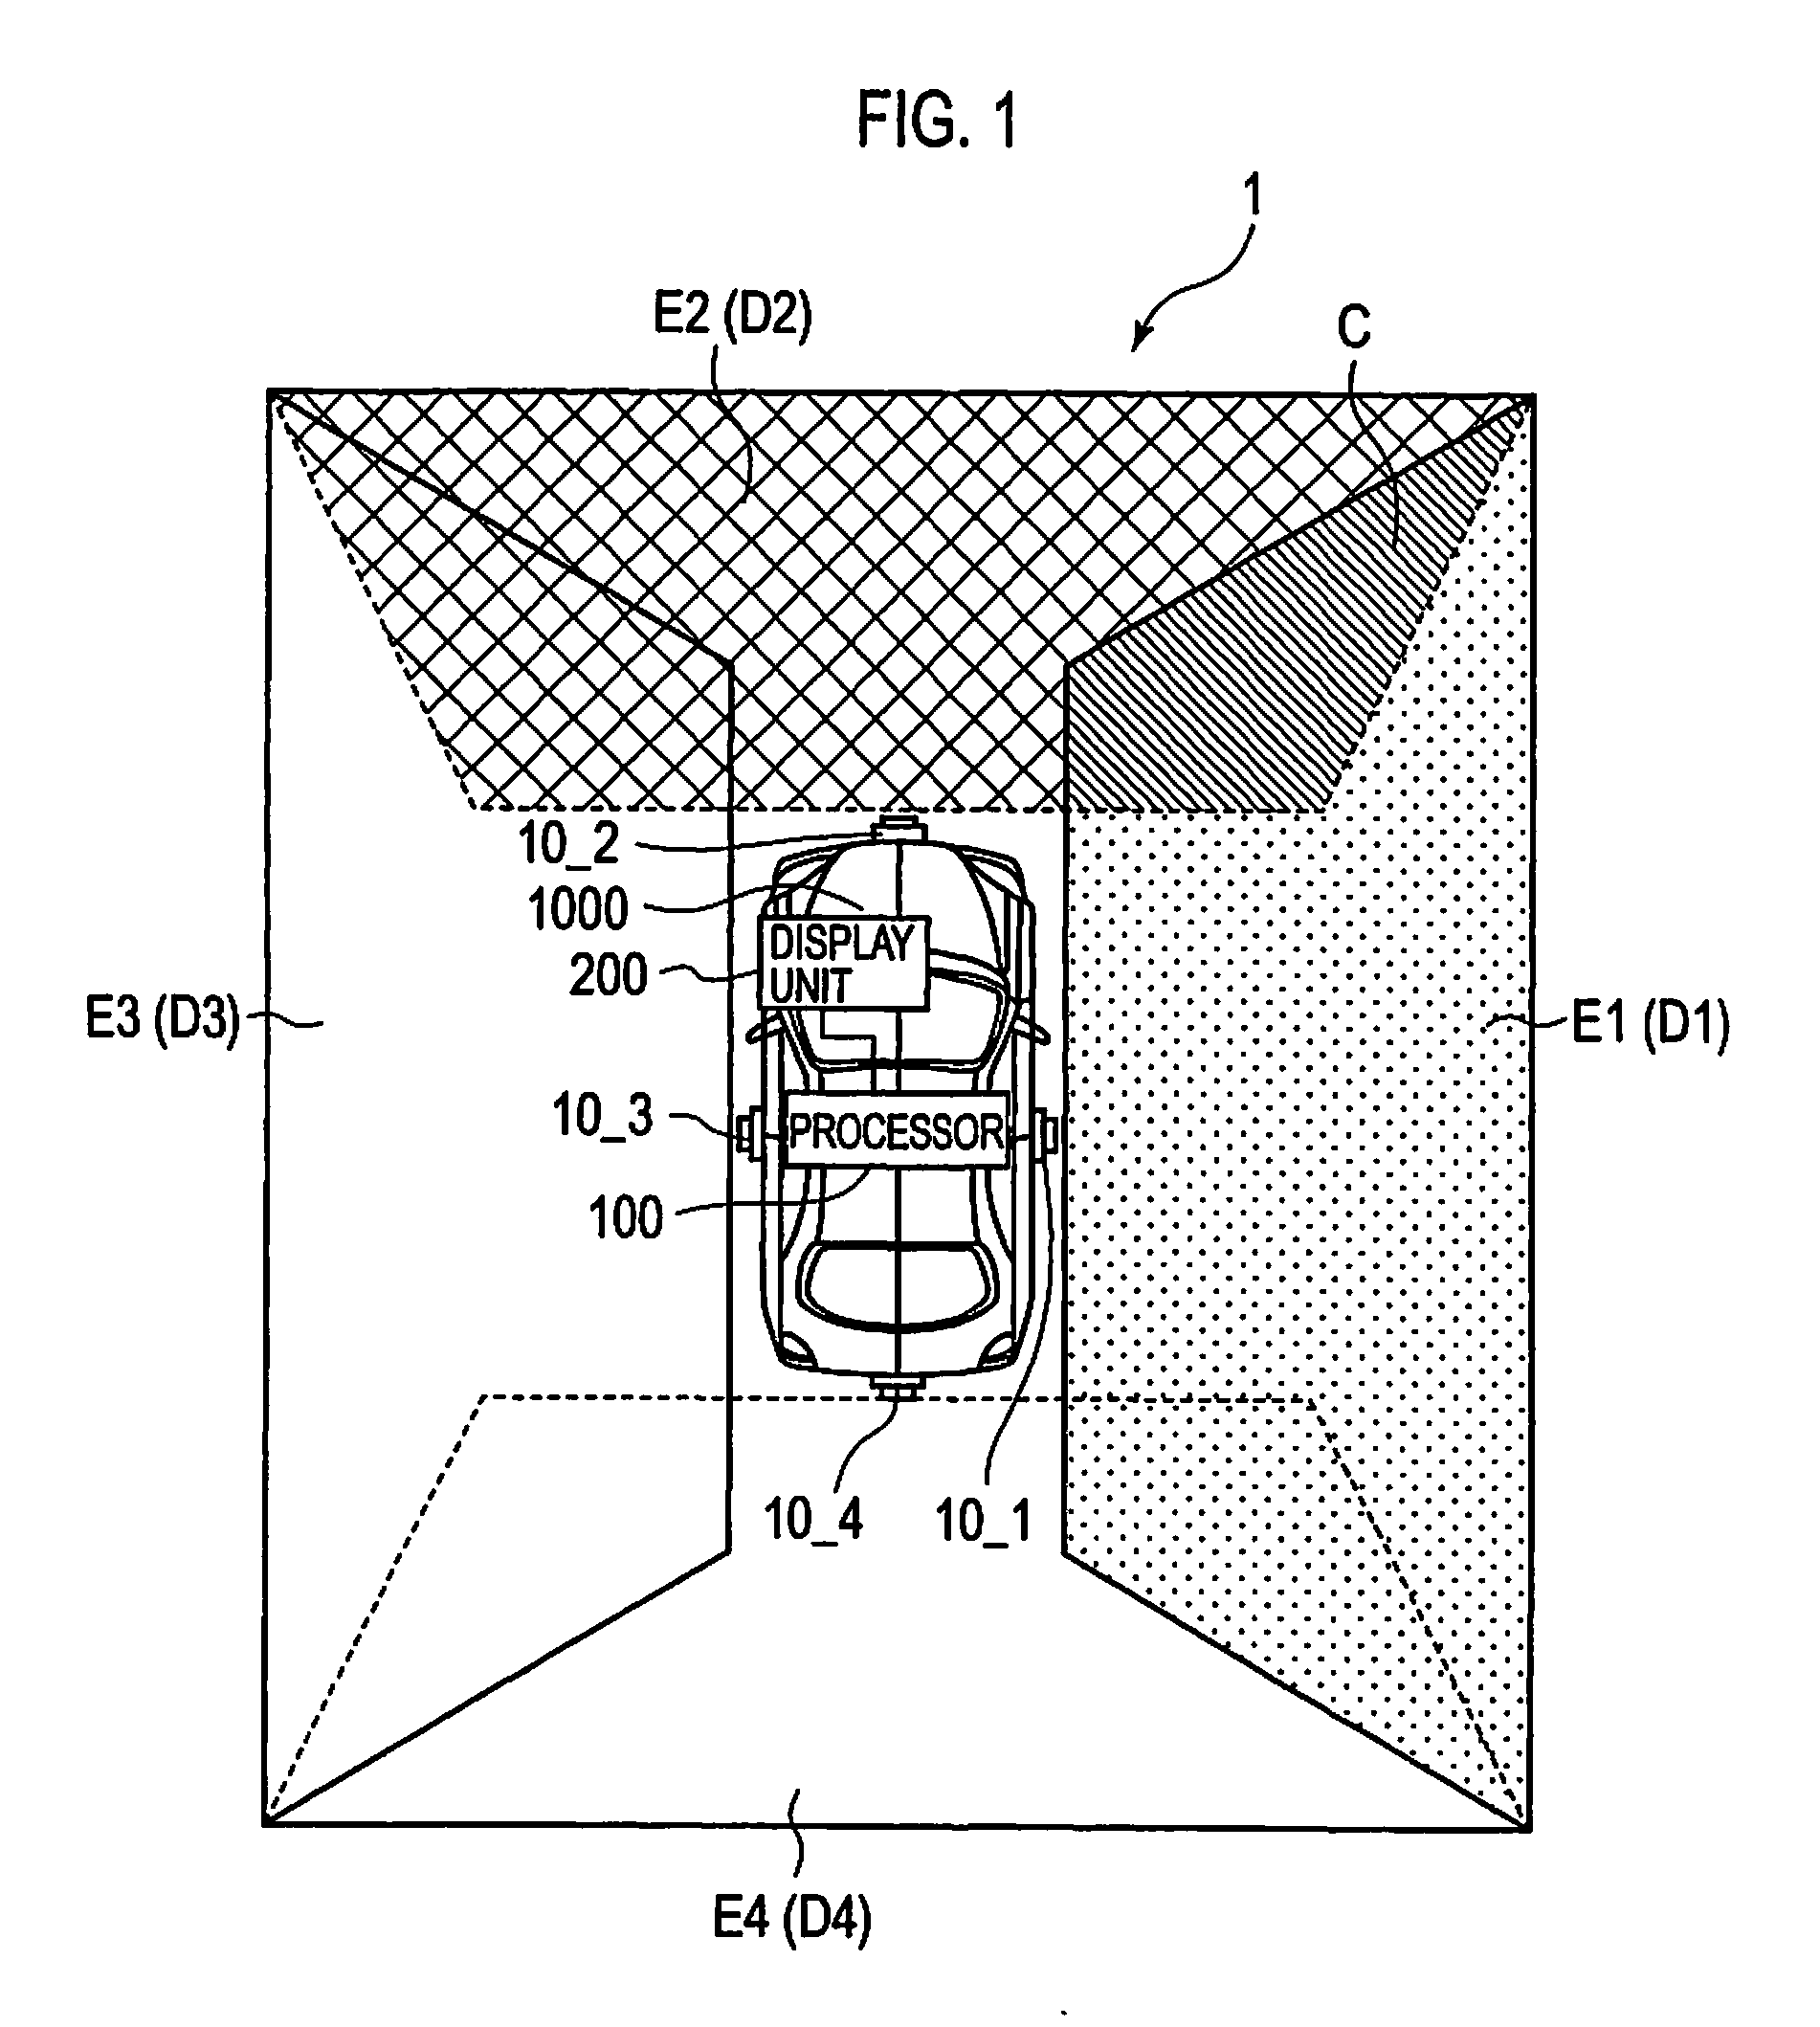 Image processor, driving assistance system, and out-of-position detecting method